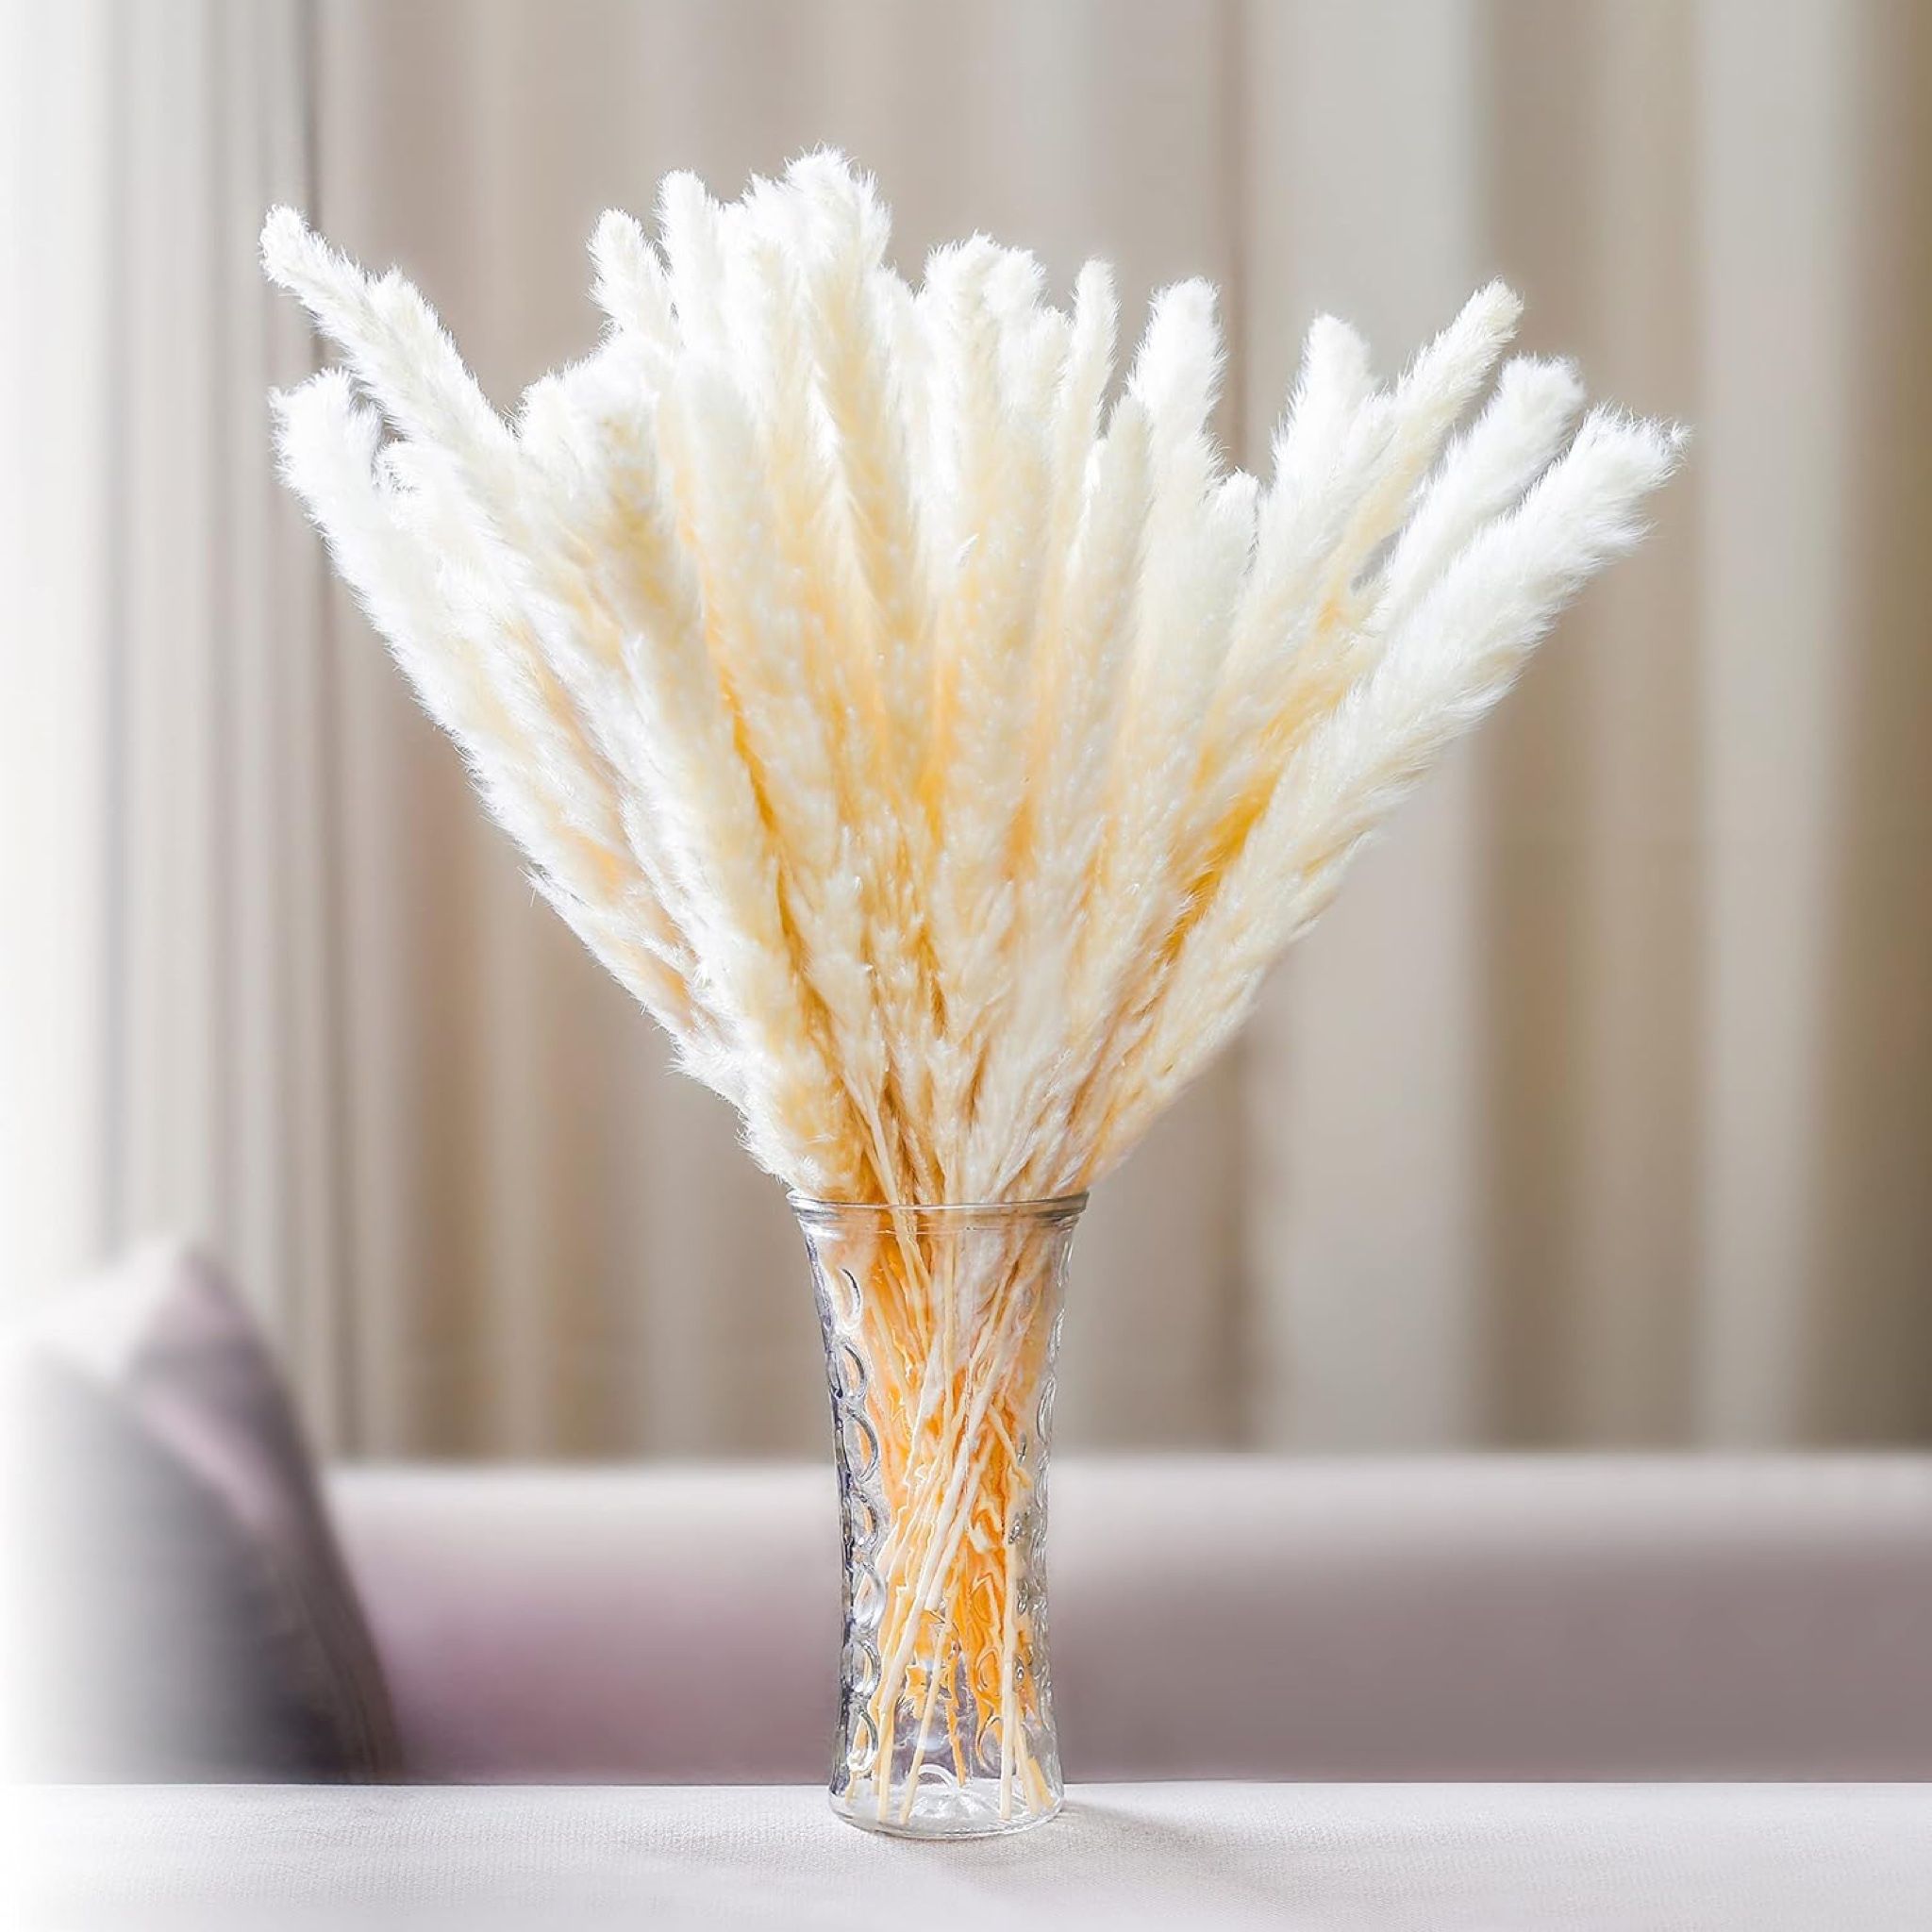 60 PCS Pampas Grass for Wedding Room Decor, 17INCH/1.4FT